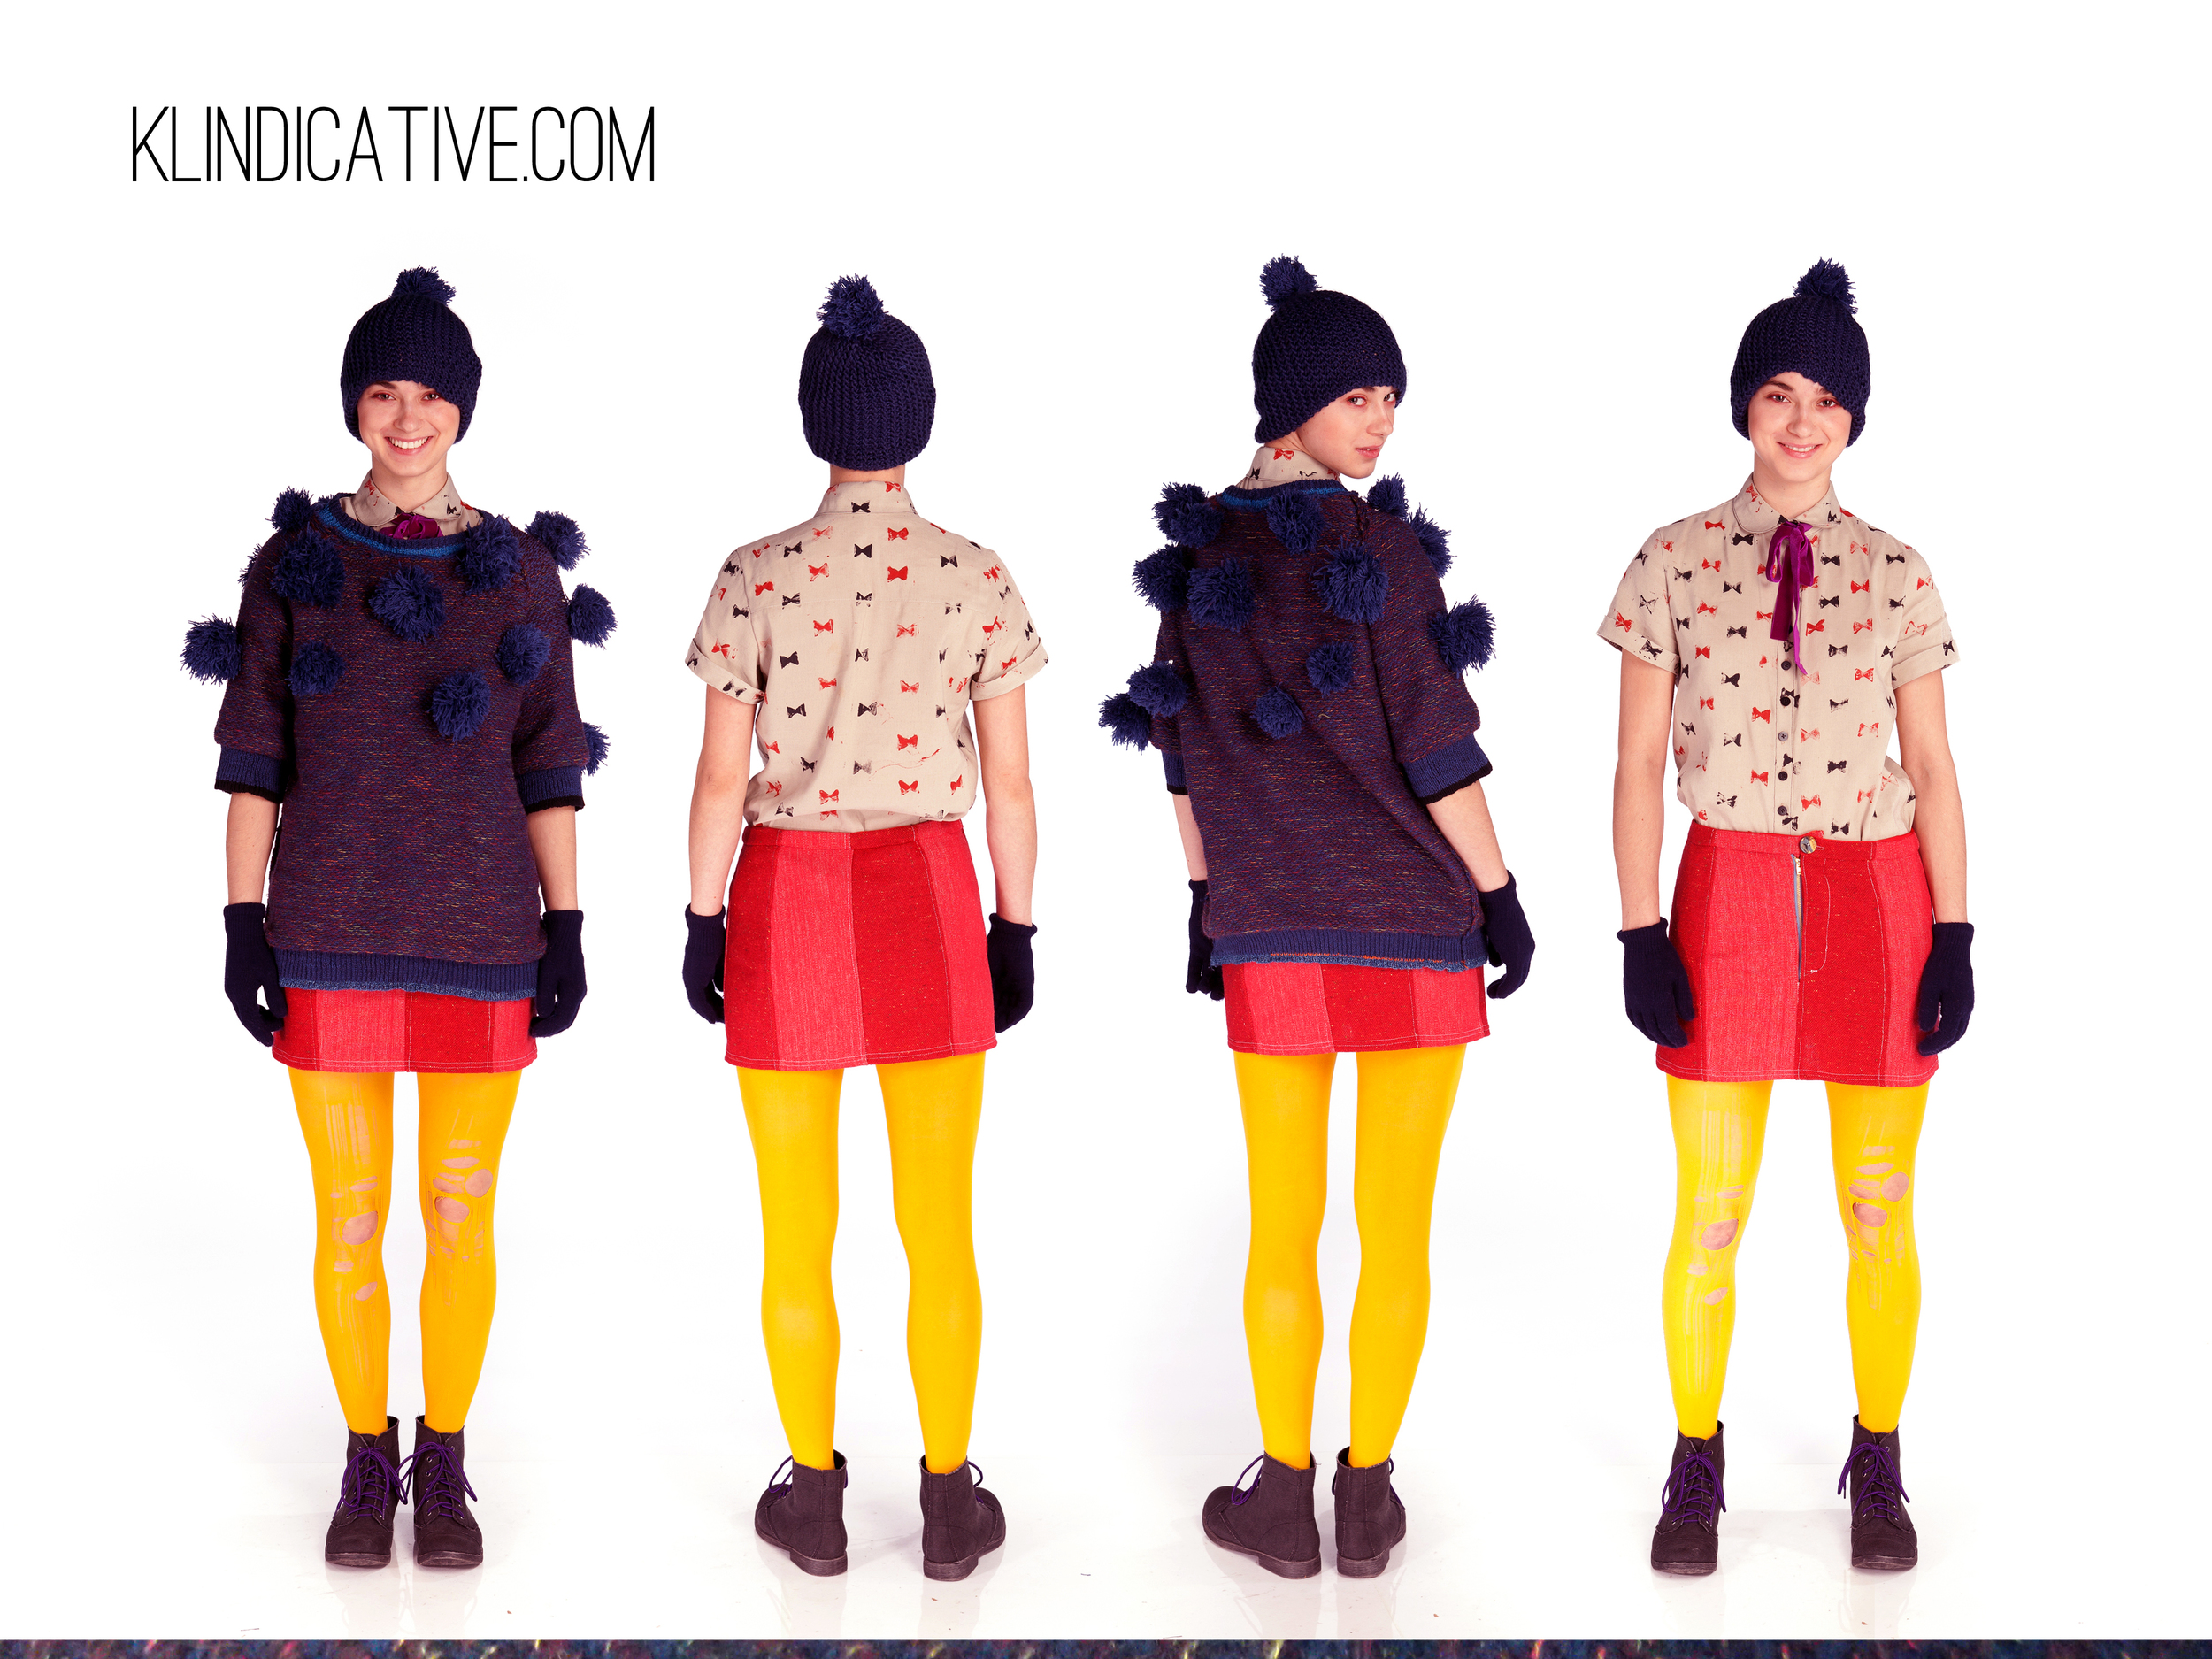  machine knit navy/rainbow sweater with detachable pom poms. wood block printed bow-tie linen button up, paneled red denim and wool skirt. modeled by Hannah Soukup. 